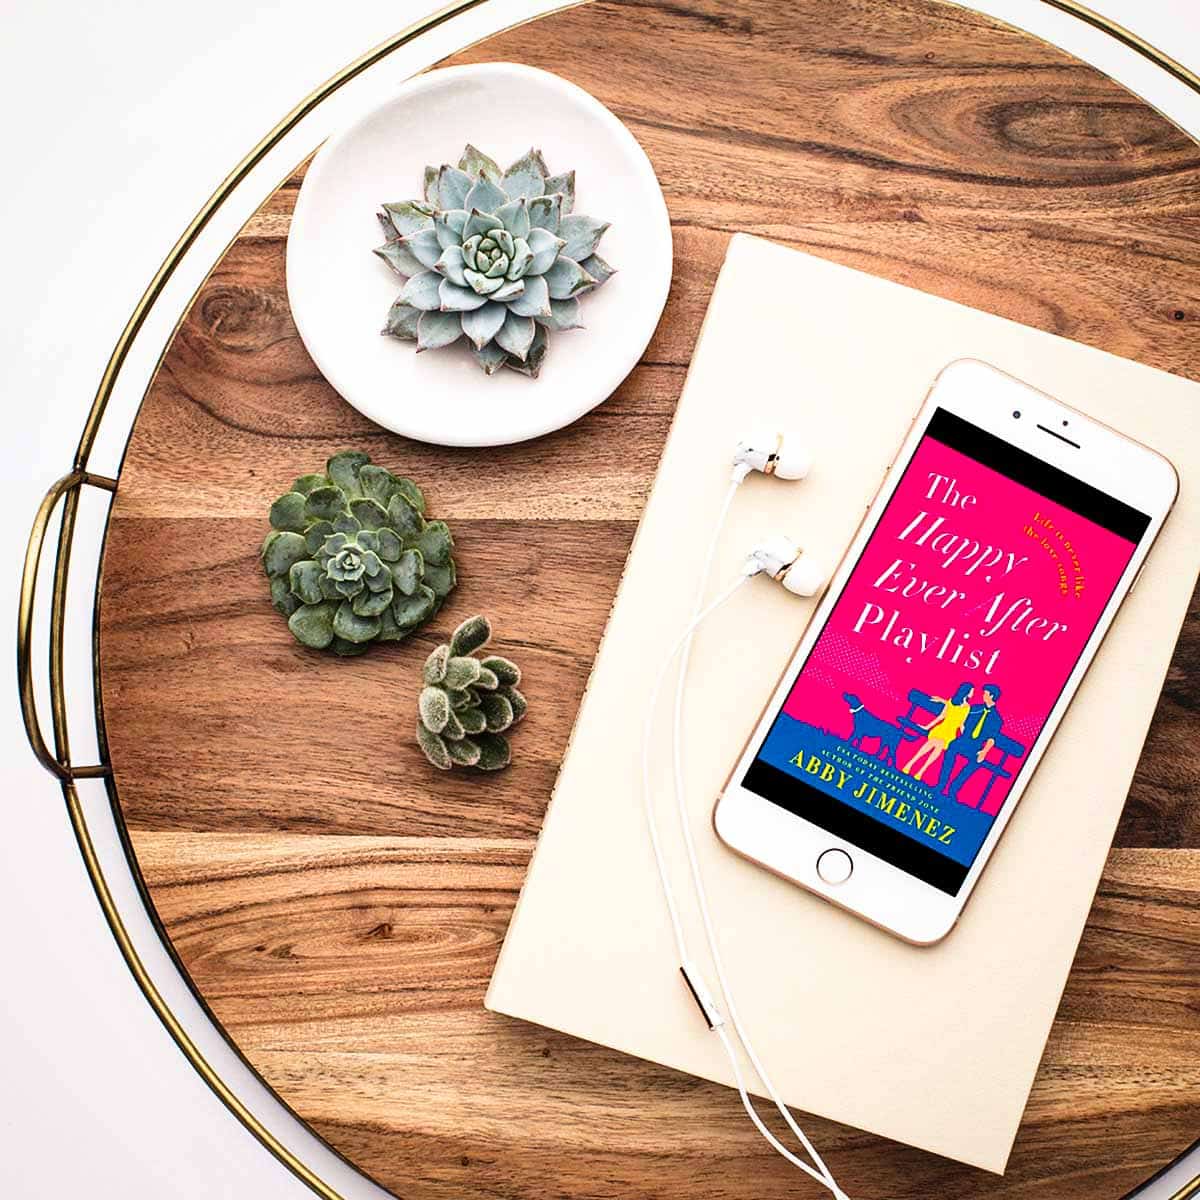 The Happy Ever After Playlist by Abby Jimenez on audiobook is pretty close to perfection—between the fresh and snappy writing, the witty banter, and the heartwarming romance, I couldn’t stop smiling!